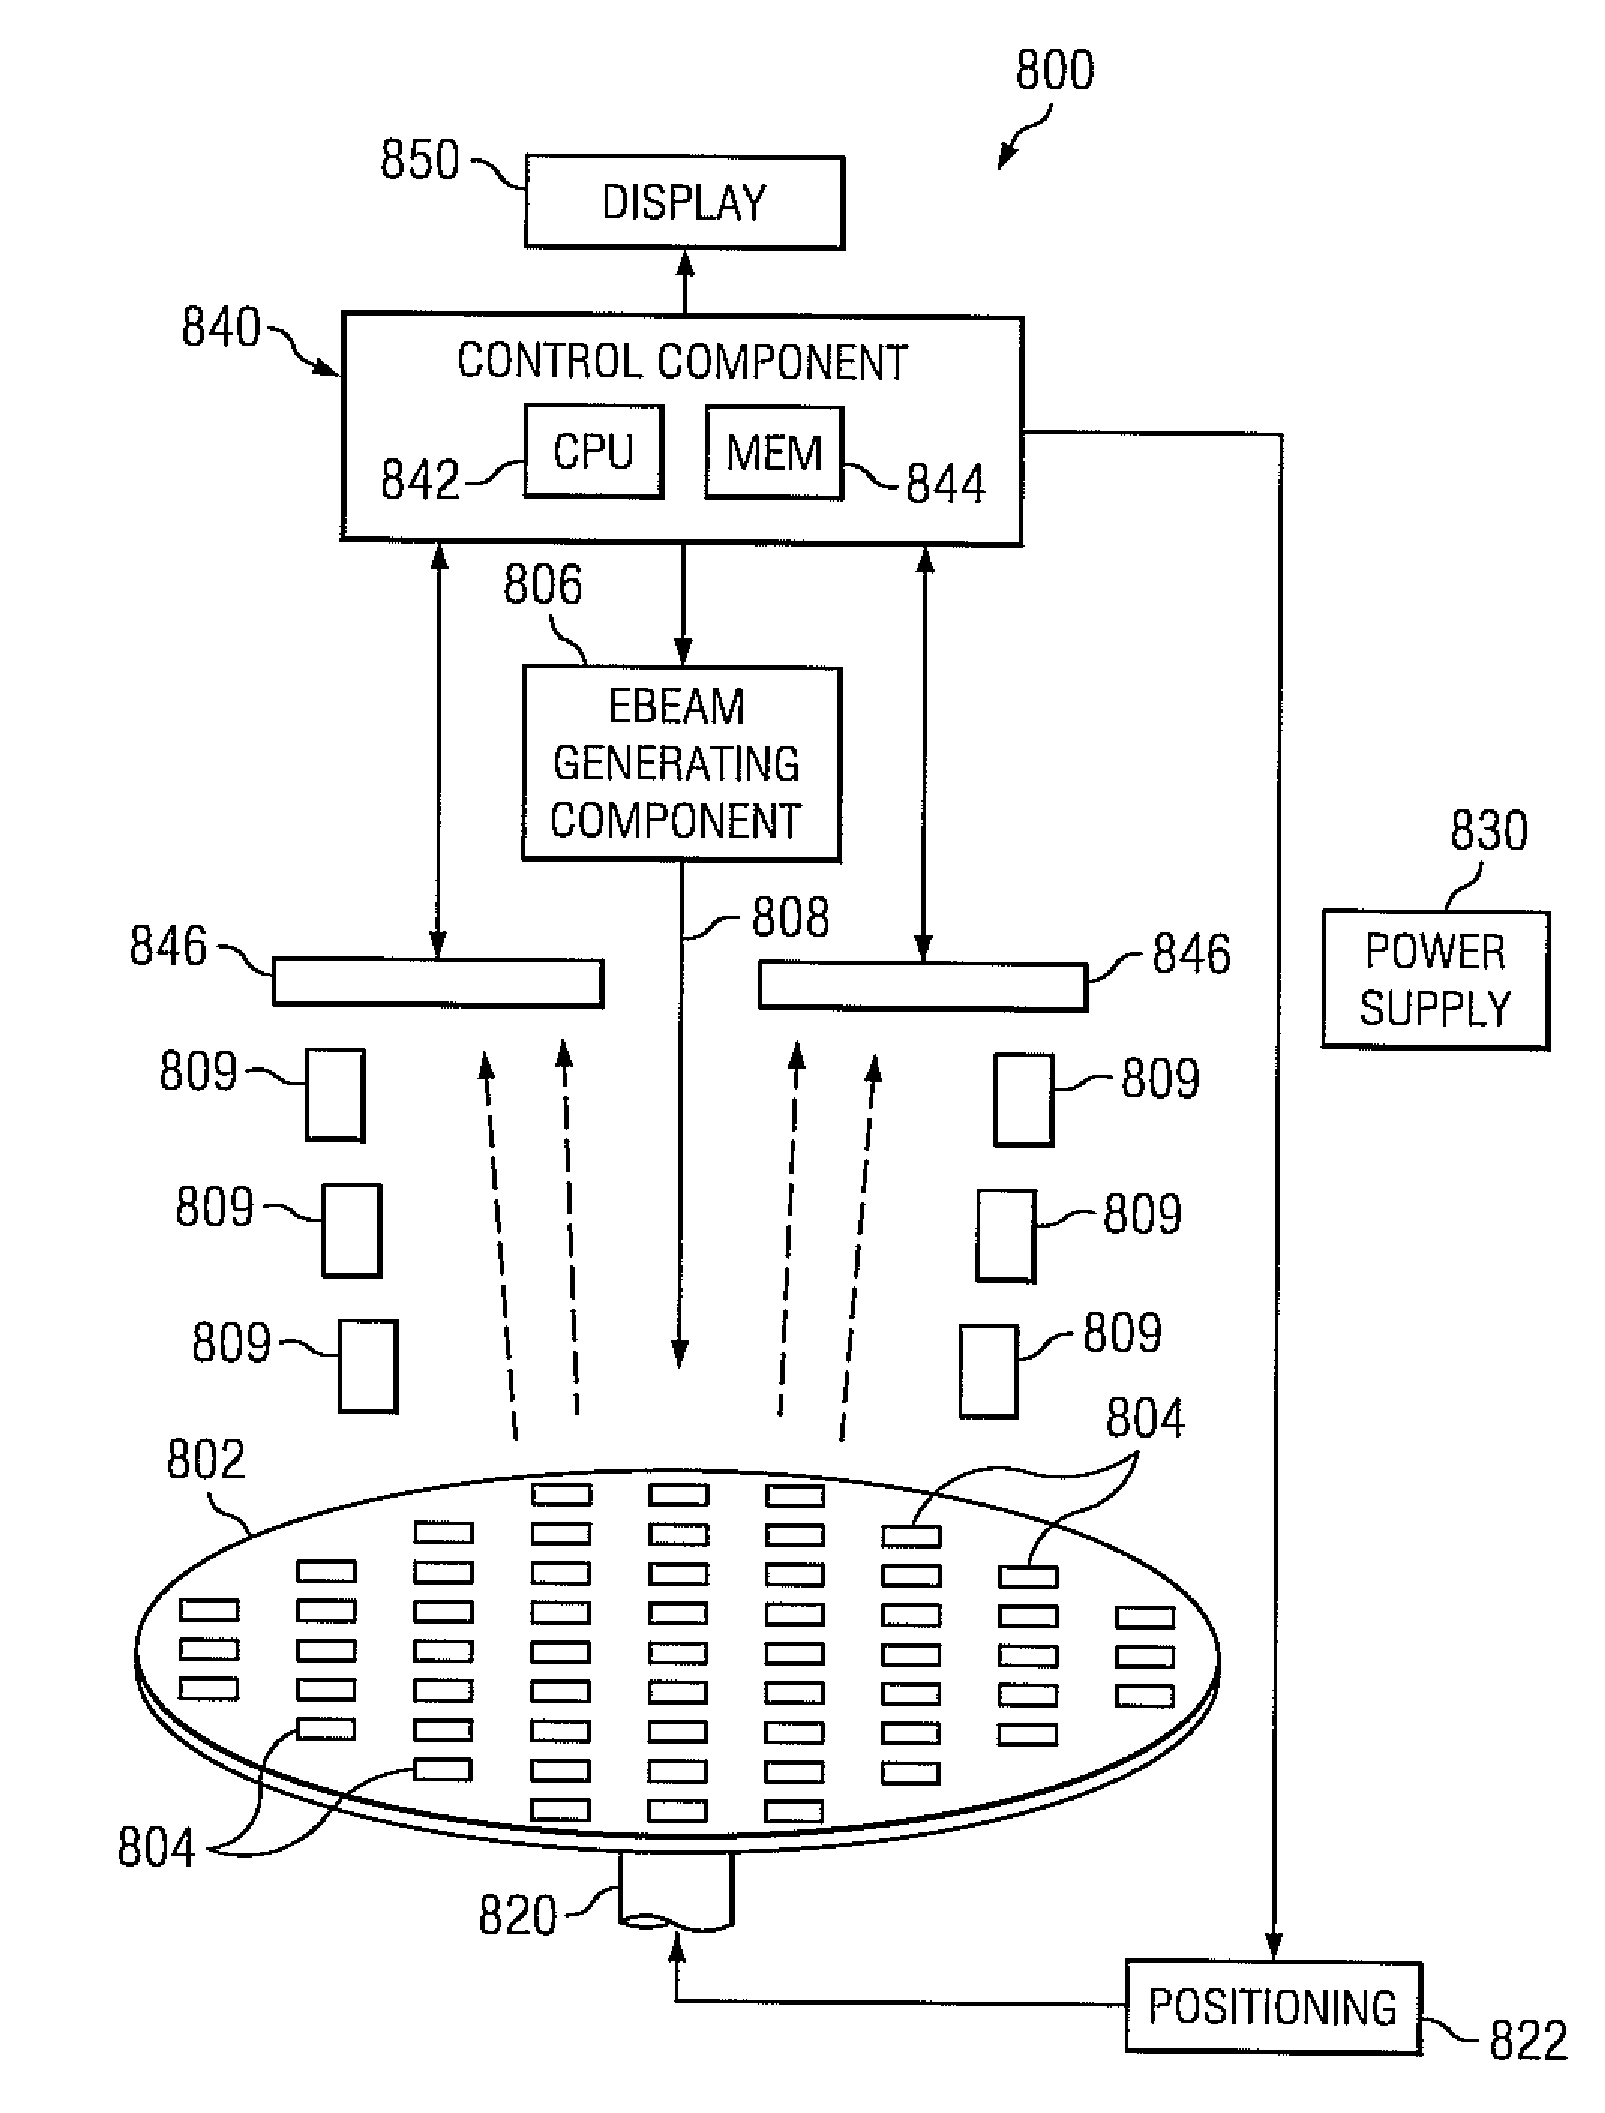 Test structures for e-beam testing of systematic and random defects in integrated circuits